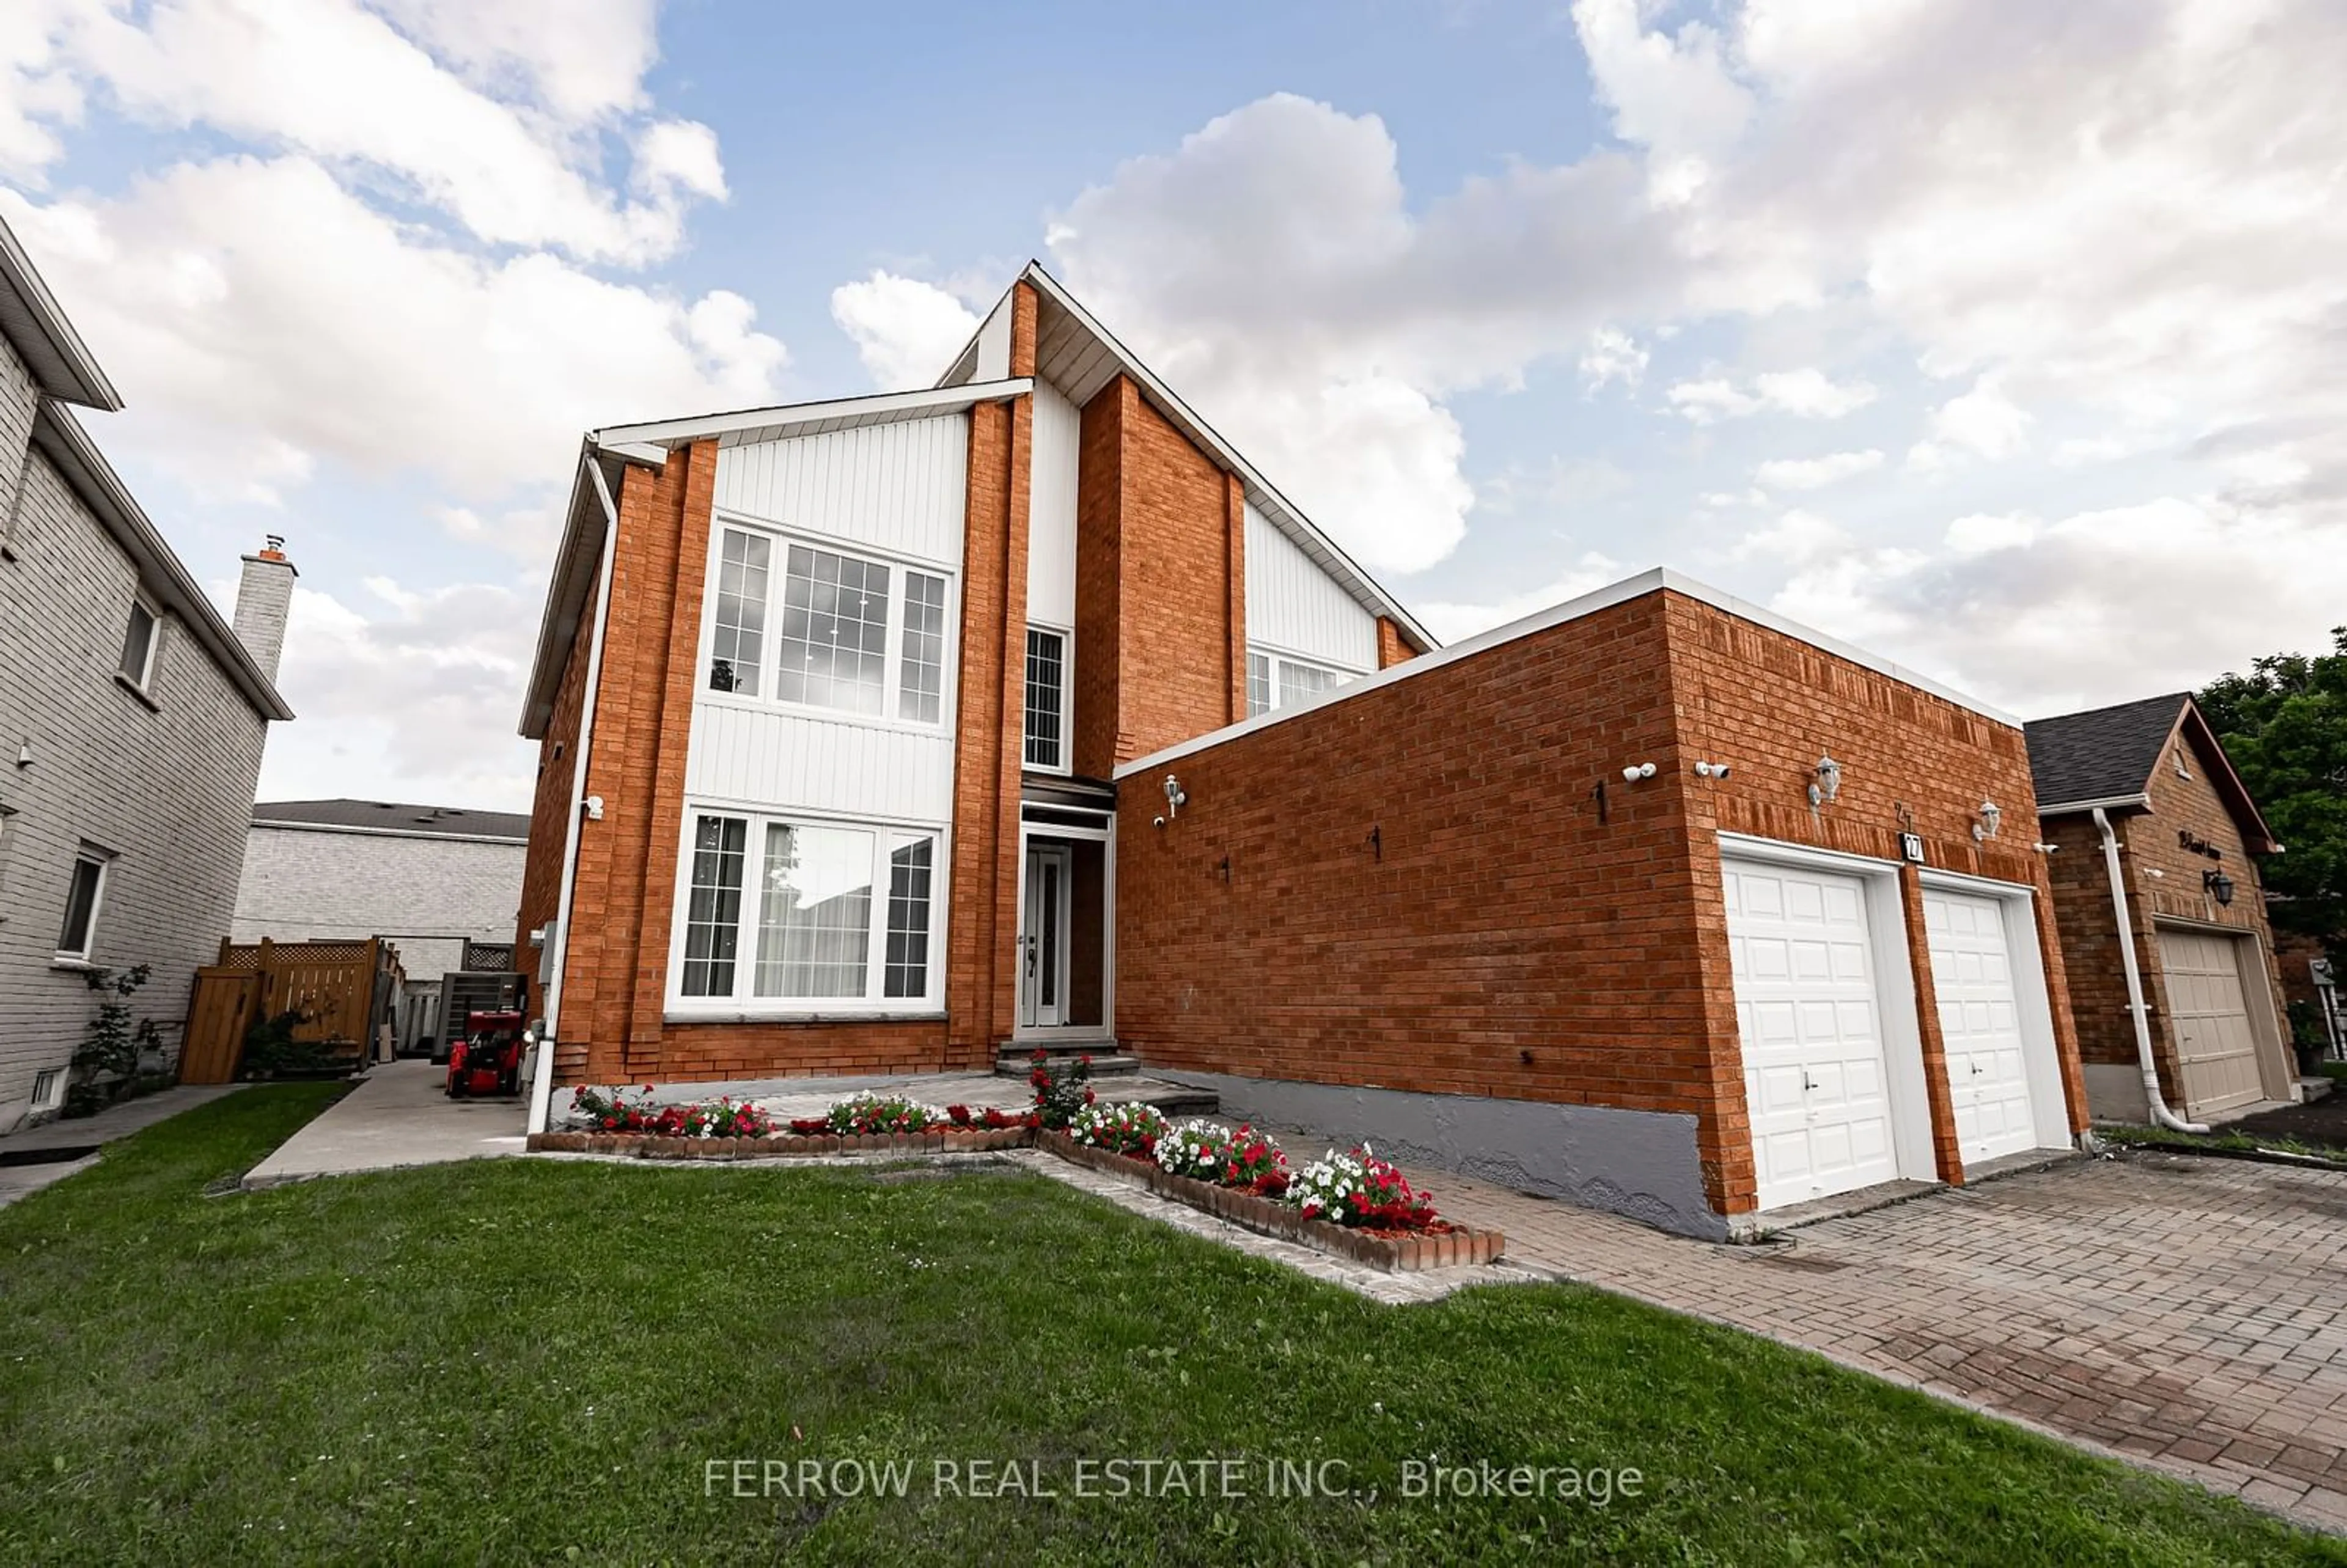 Home with brick exterior material for 27 Randall Ave, Markham Ontario L3S 1J8